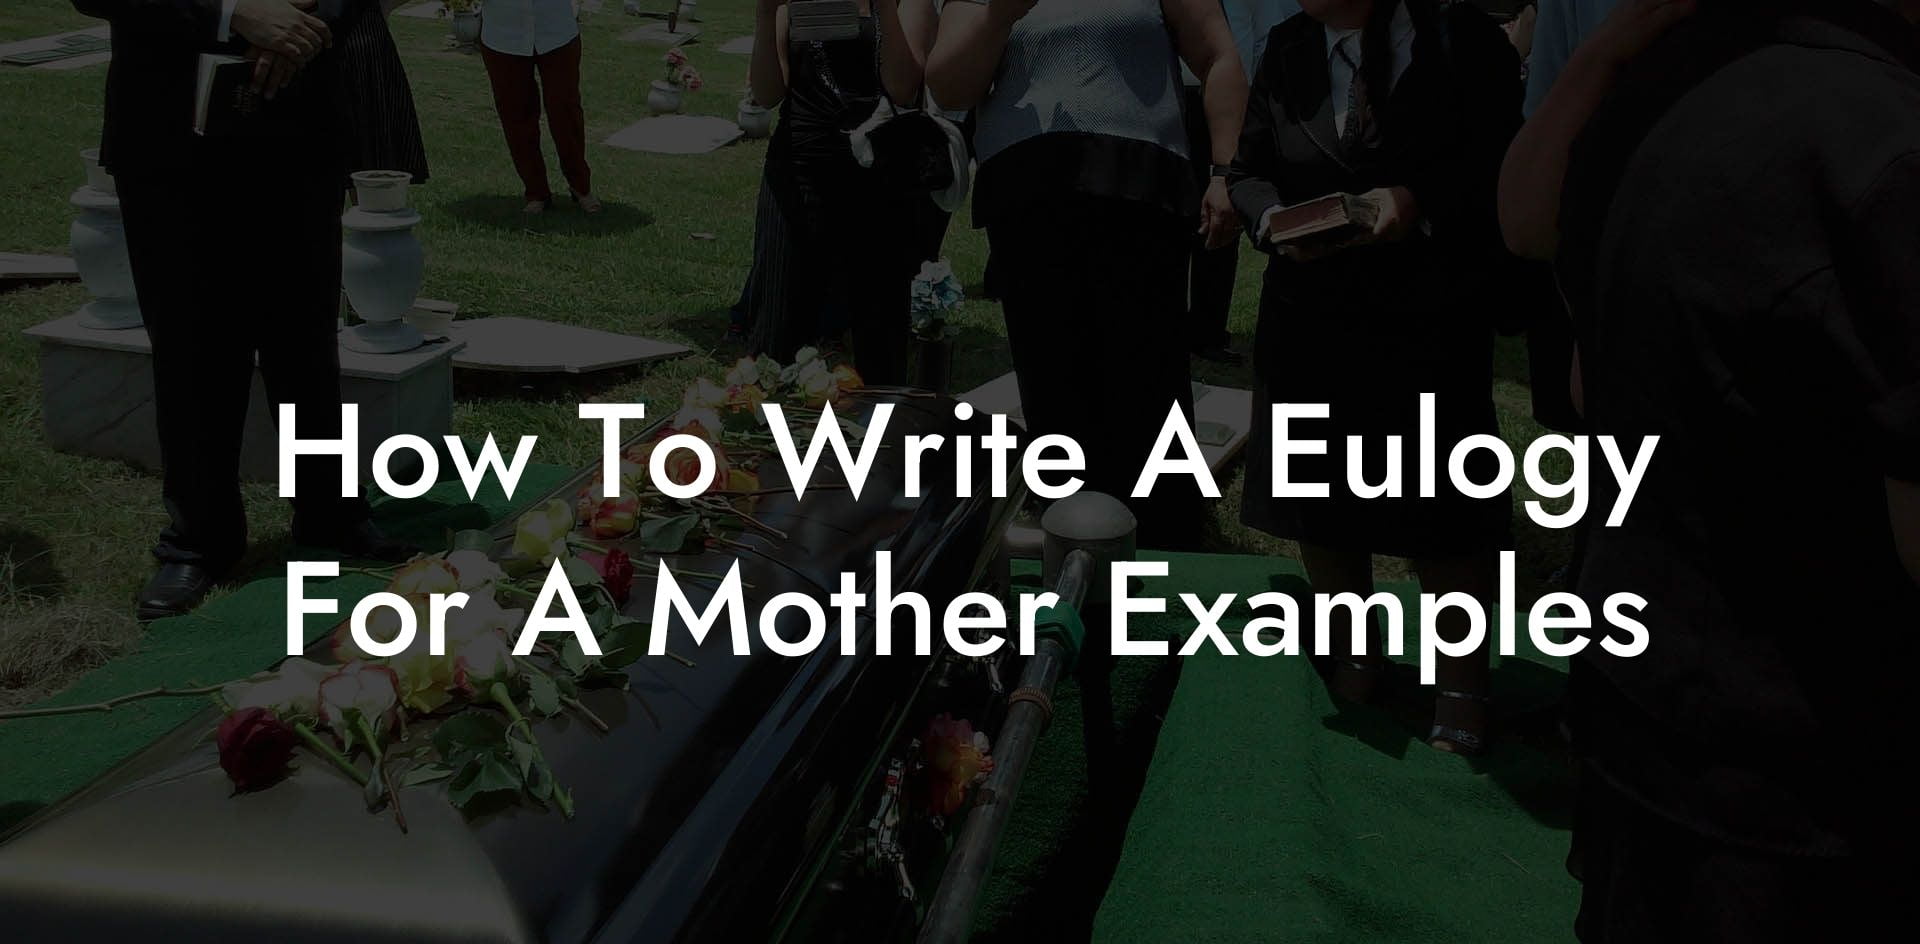 How To Write A Eulogy For A Mother Examples